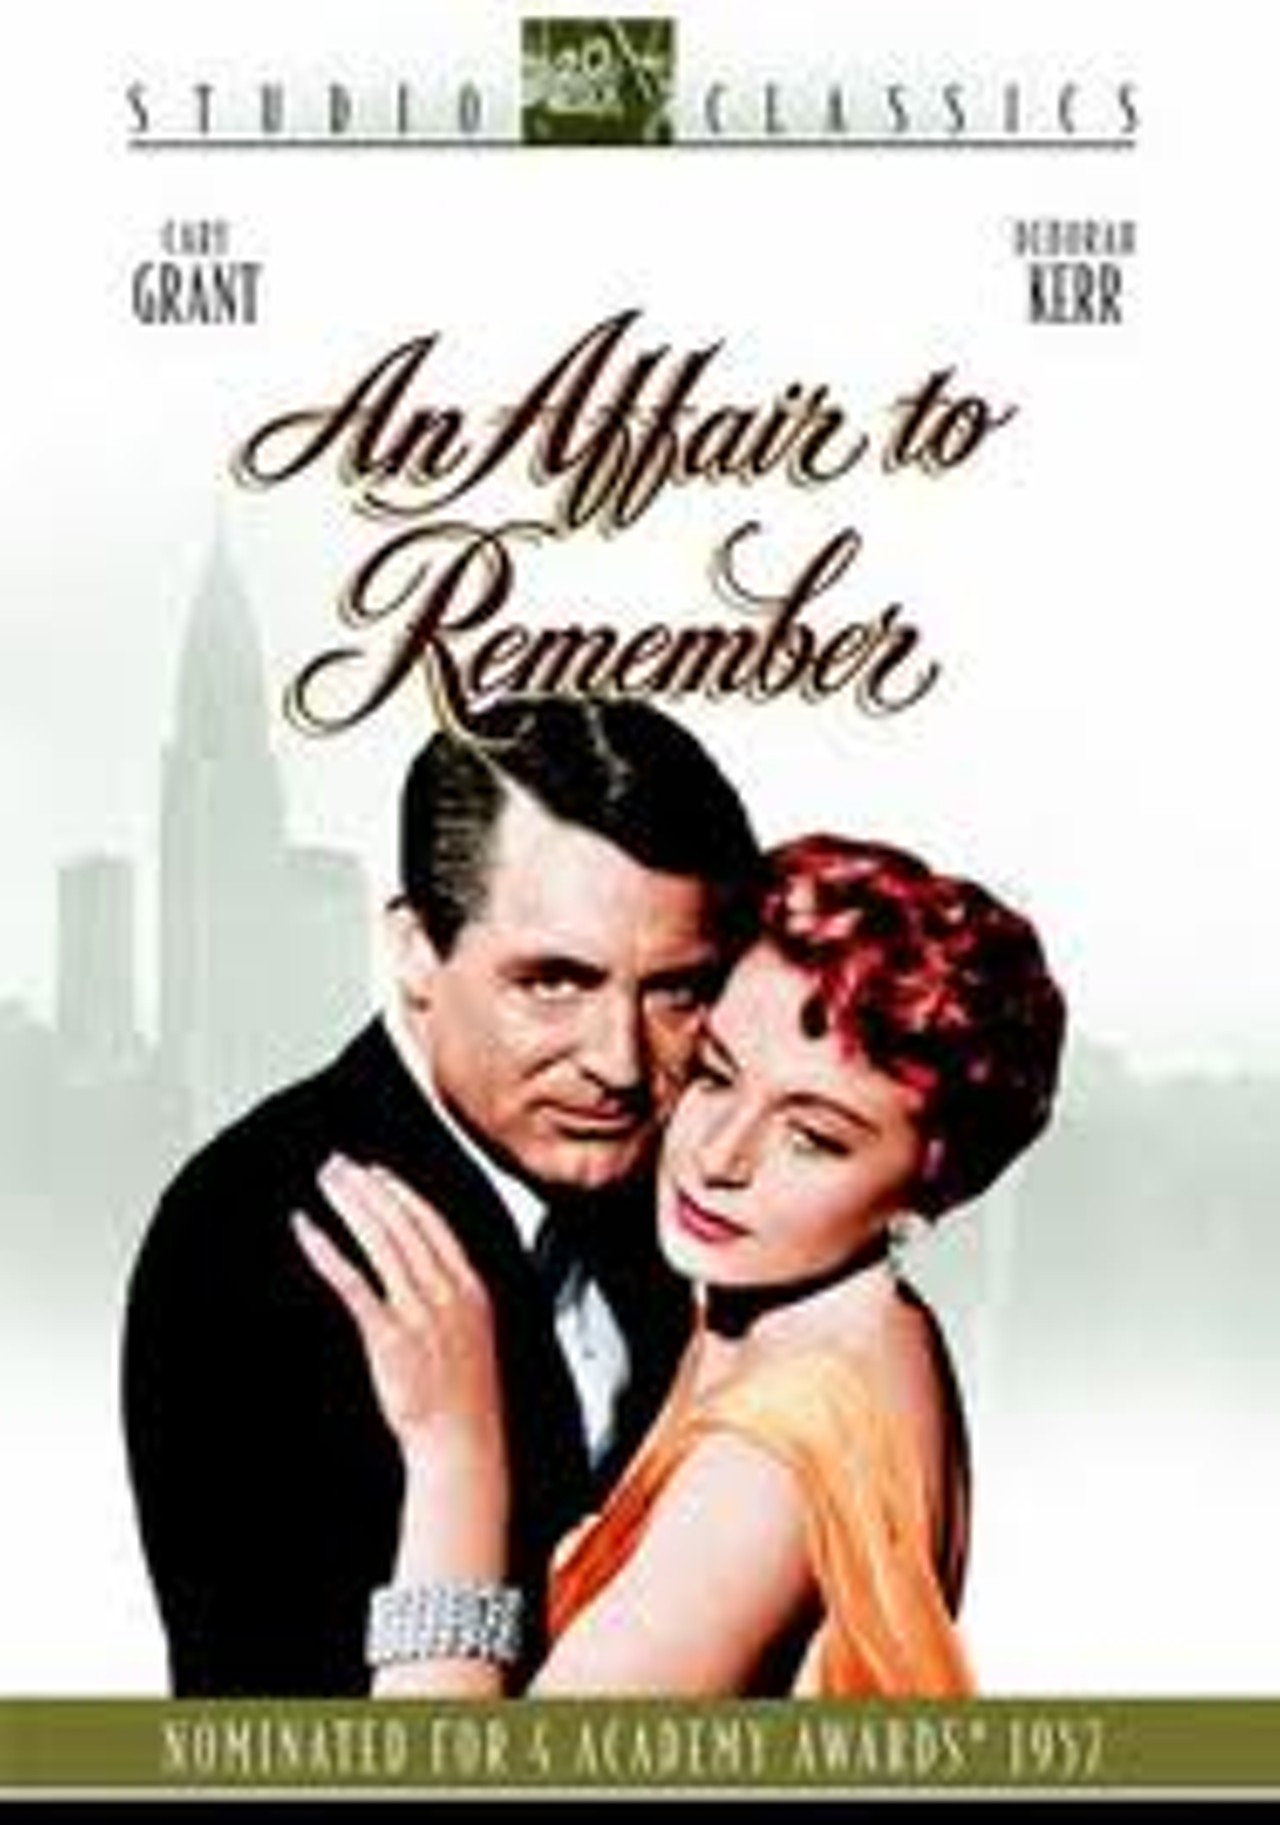 Carey Grant and Deborah Kerr star in this touching classic playing at the Capitol Theatre on Sunday at 11 a.m. as part of Cleveland Cinemas’ Sunday Brunch series. Grant and Kerr fall in love on a transatlantic ocean liner but are both involved with other people! They decide to meet 6 months later on the top of the Empire State Building if their situations change and their love endures. What happens next is the stuff of cinematic lore, and is likely the reason why An Affair to Remember is No. 5 on AFI’s Most Romantic Movies list. (Allard).